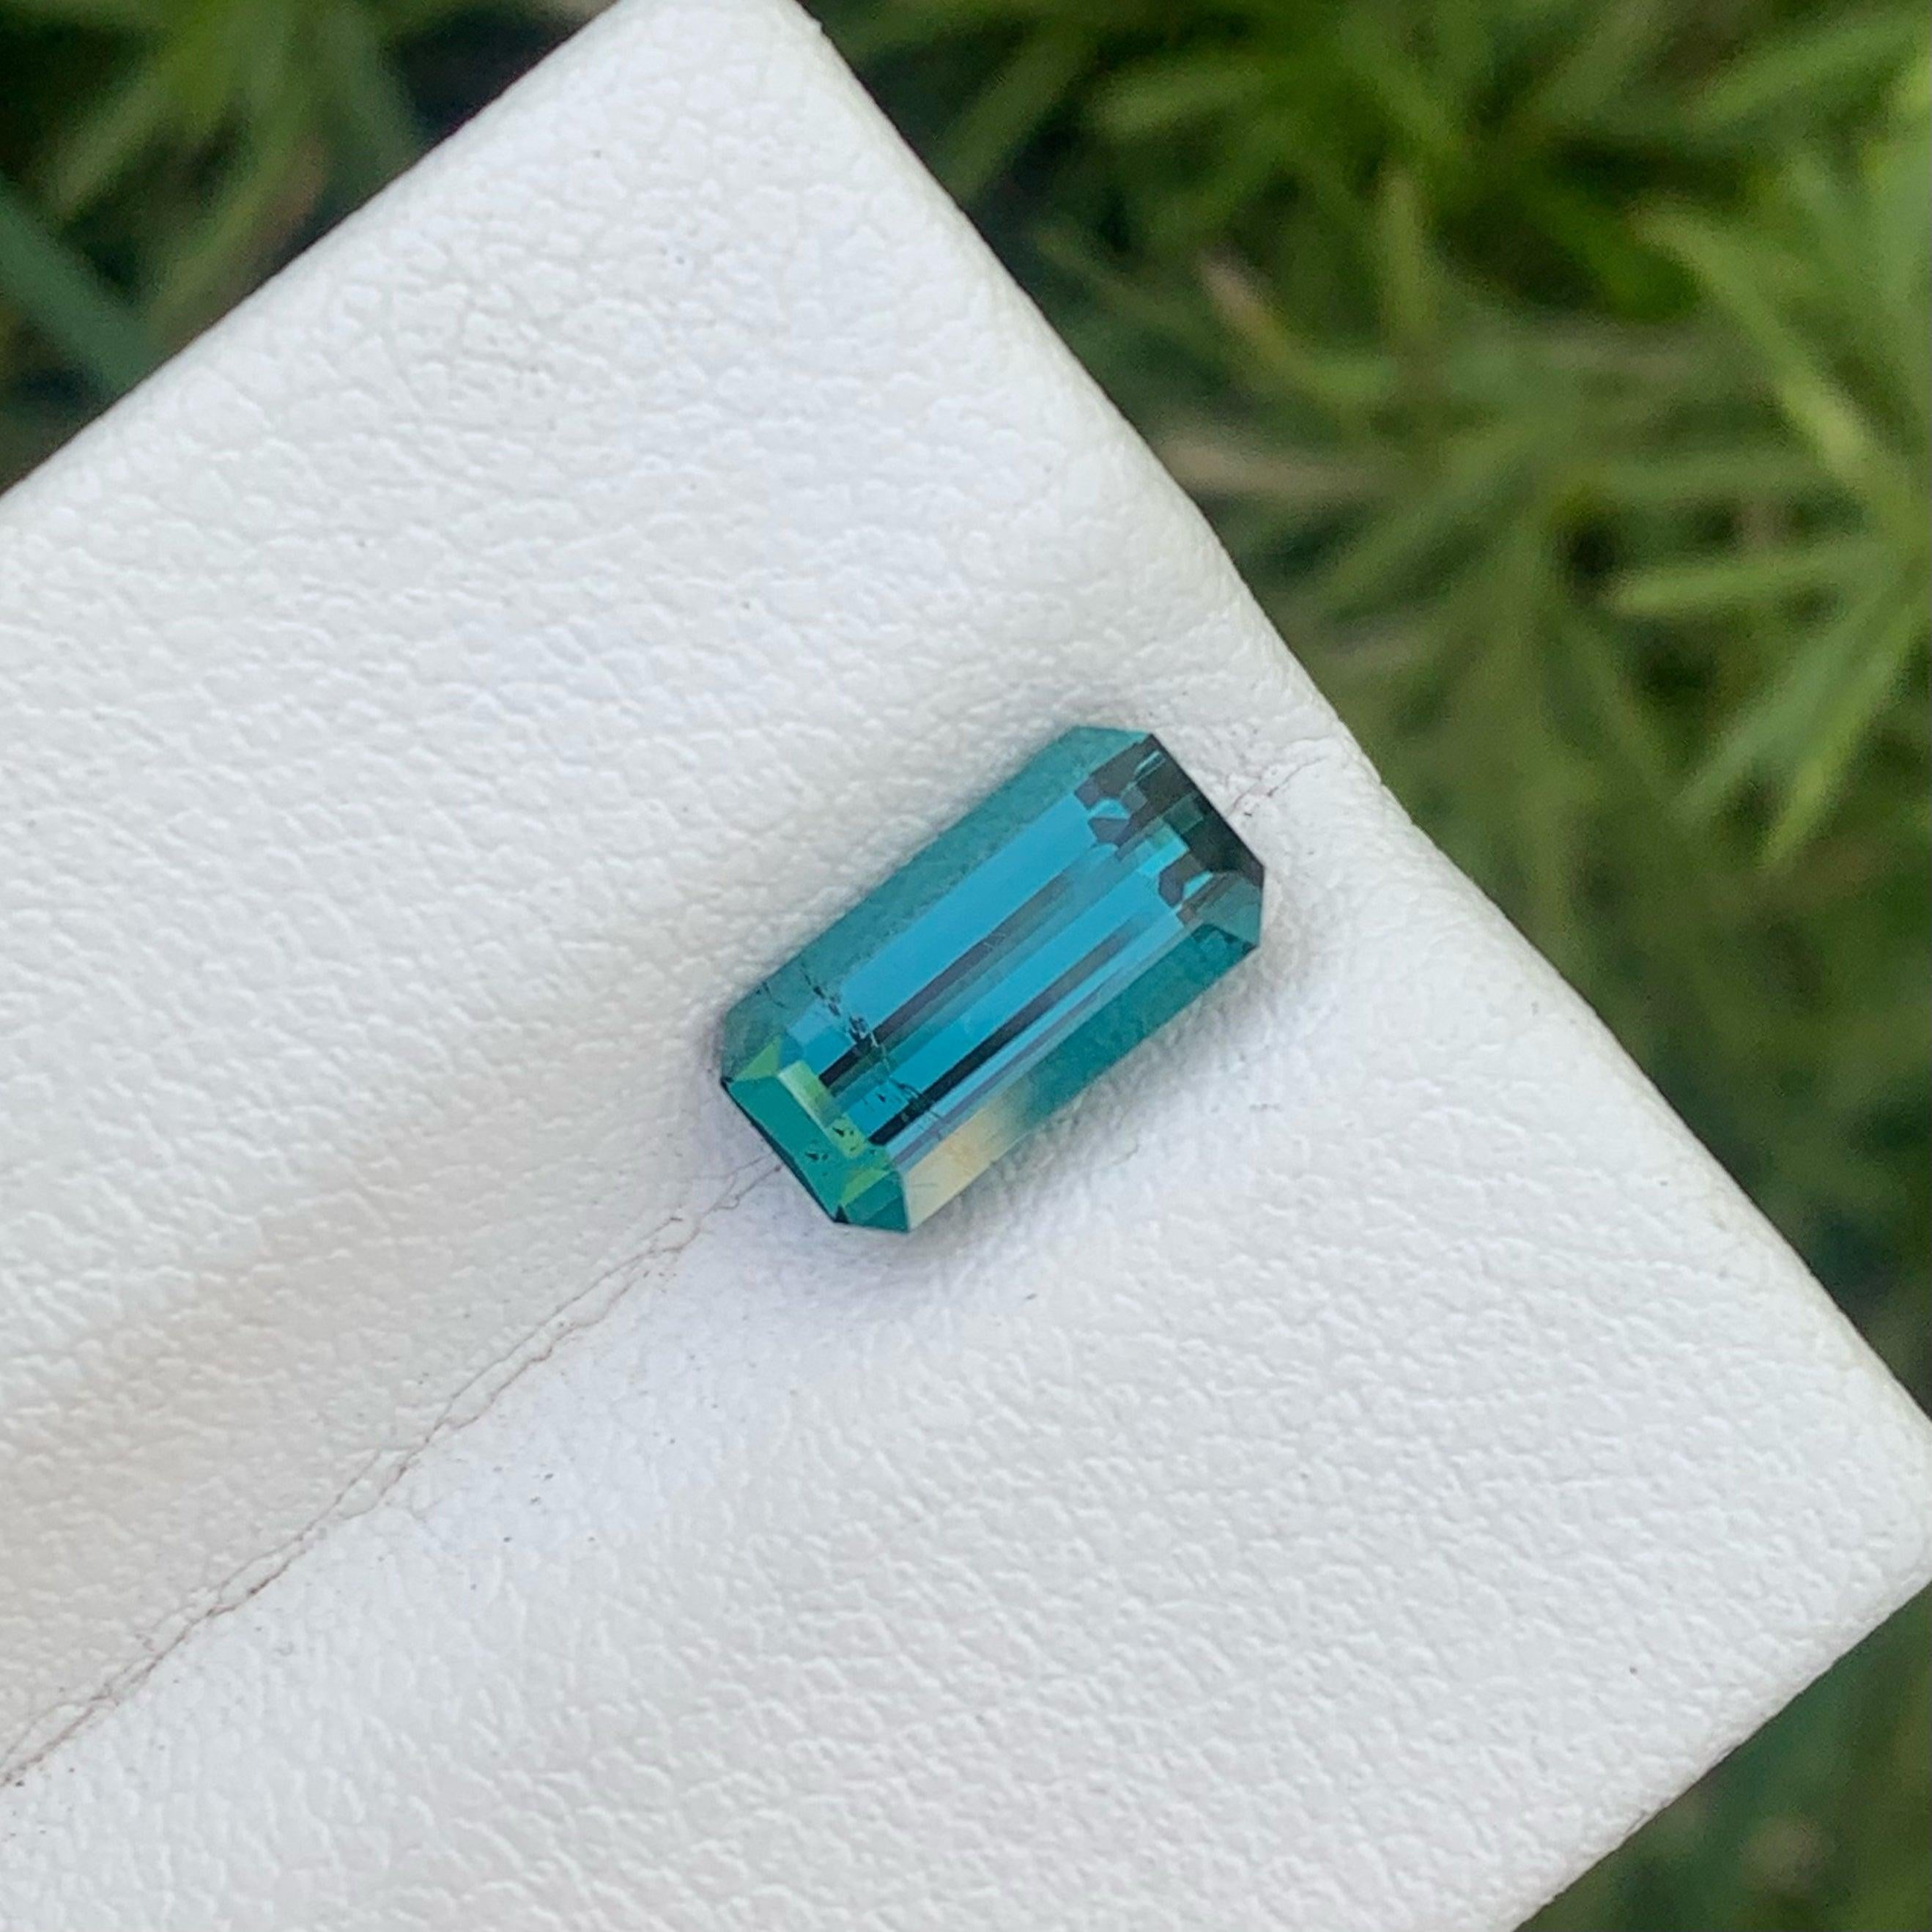 Lovely Indicolite Loose Tourmaline Gemstone, Tourmaline For Sale At Wholesale Price Natural High Quality 1.50 Carats SI Clarity Loose Tourmaline From Afghanistan.

Product Information
GEMSTONE TYPE:	Lovely Indicolite Loose Tourmaline